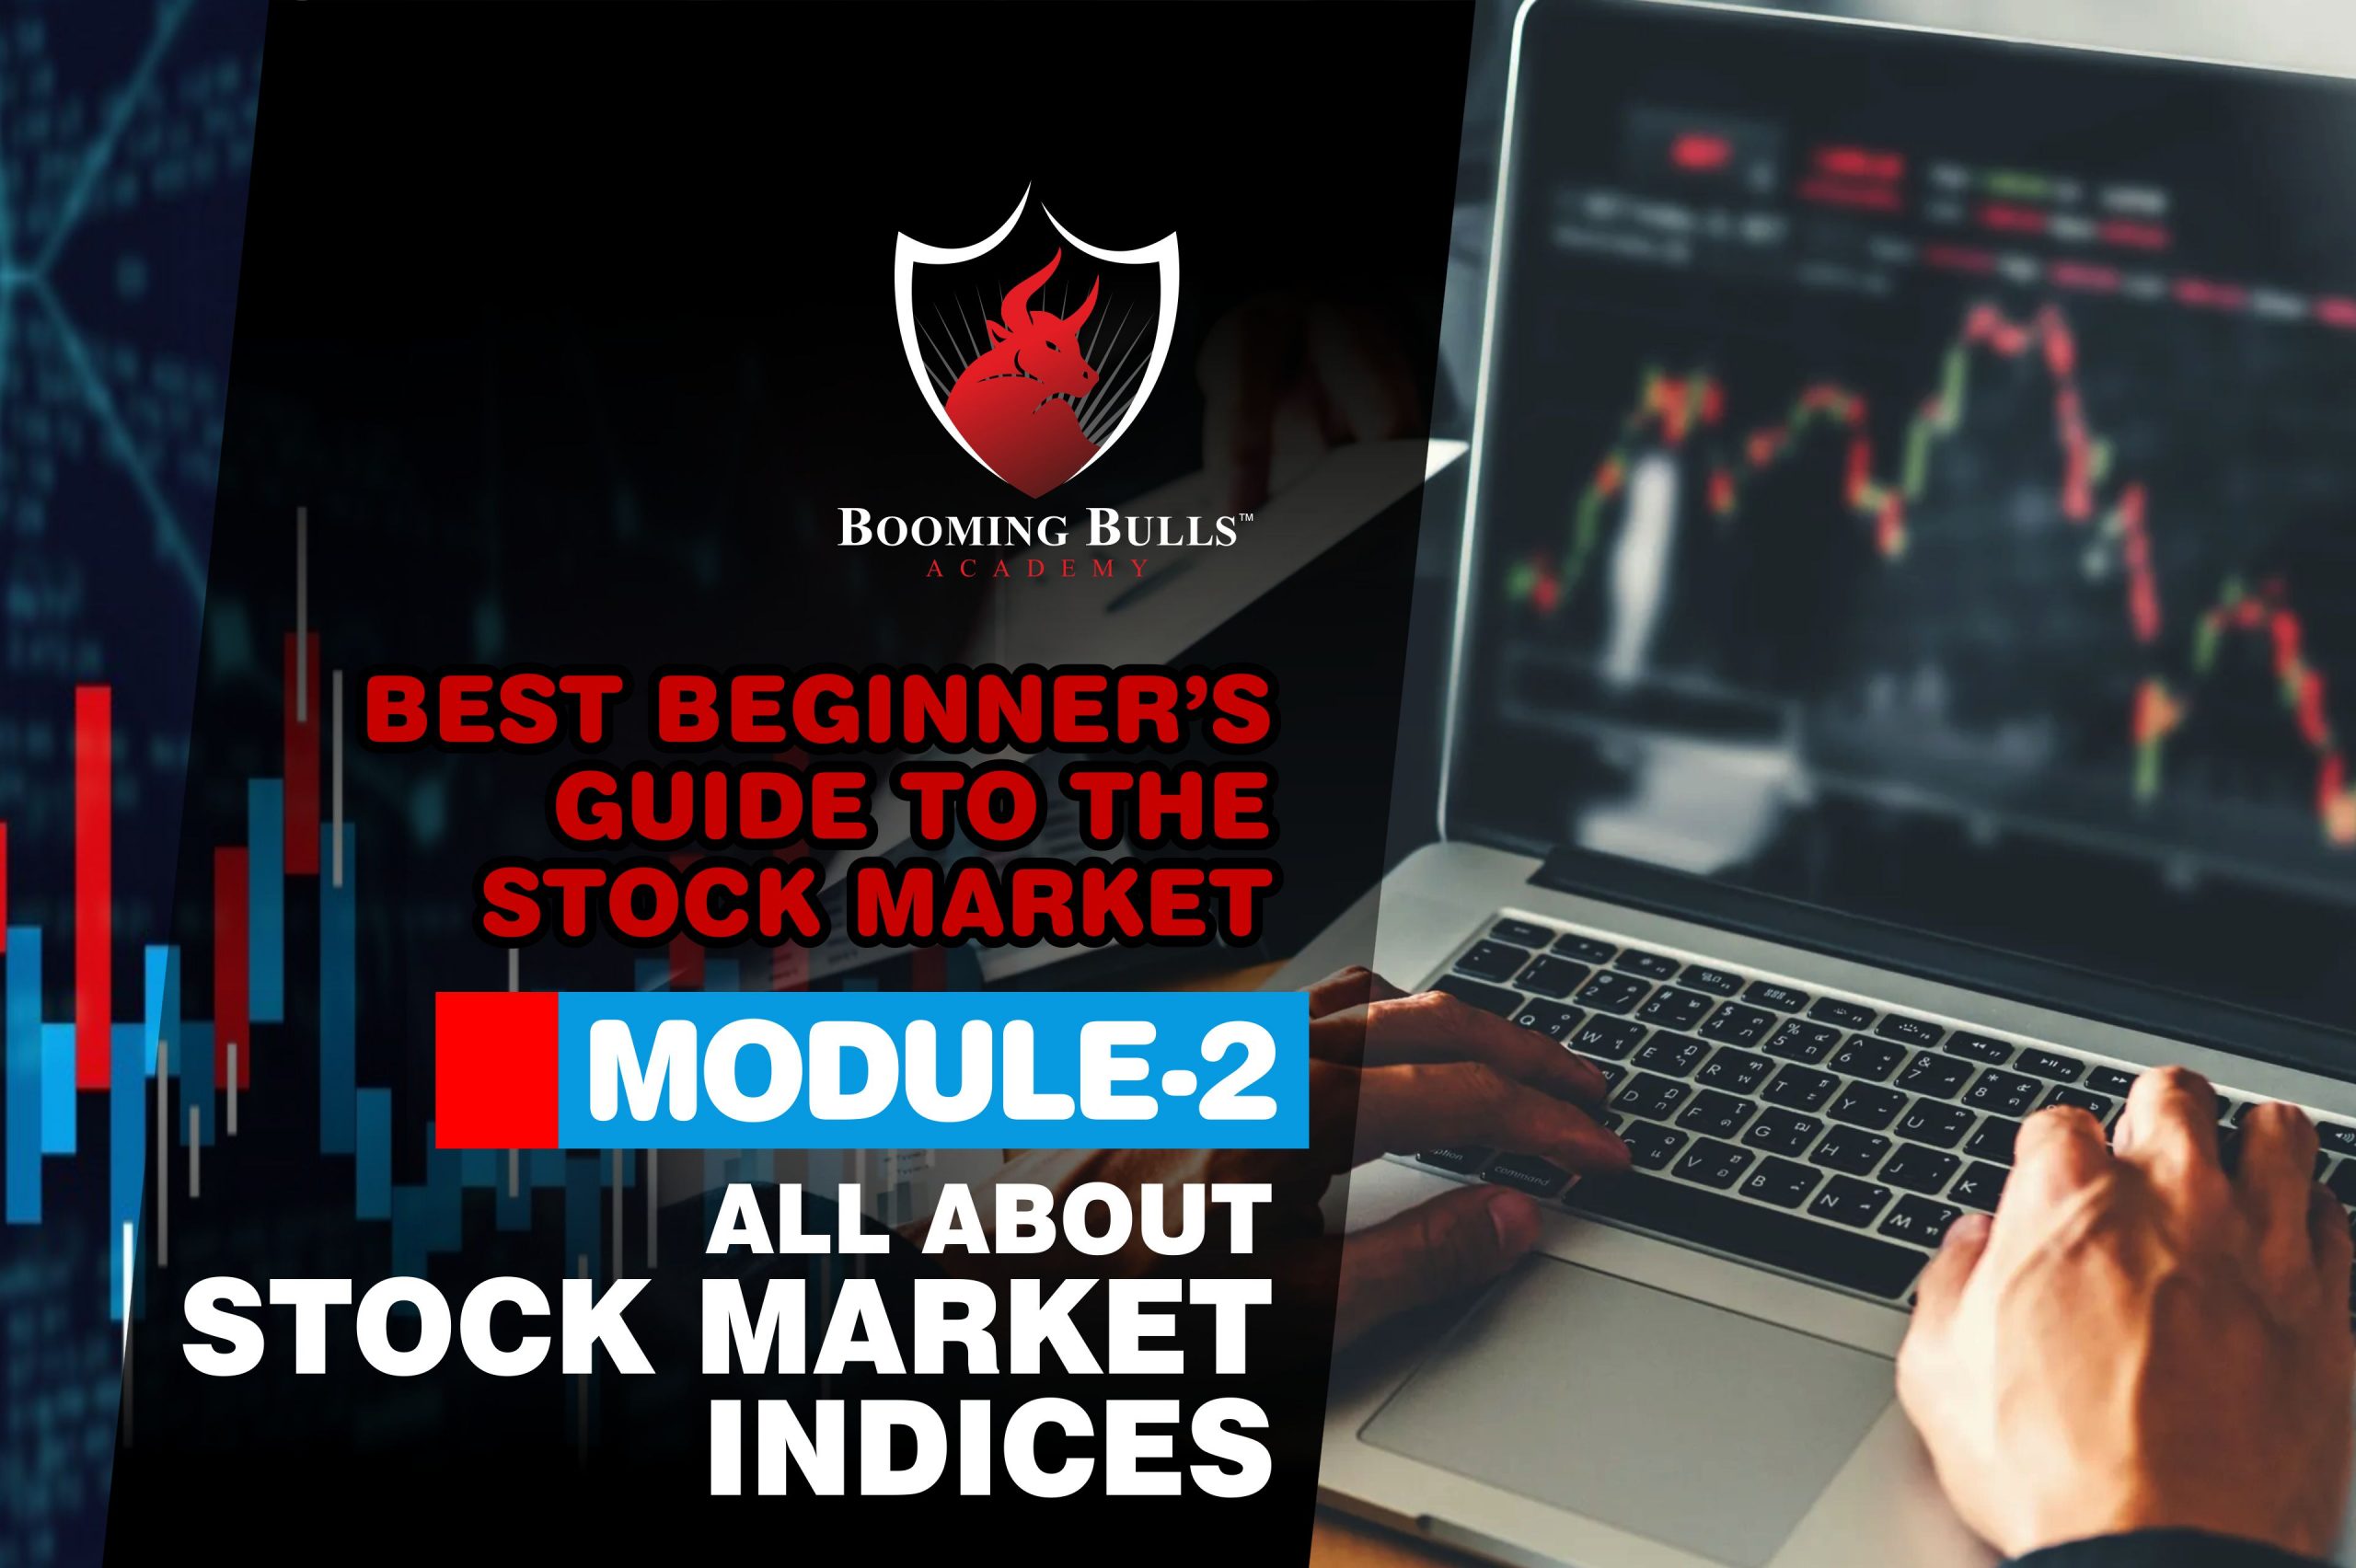 All About Stock Market Indices | Best Beginner’s Guide to the Stock Market | Module 2